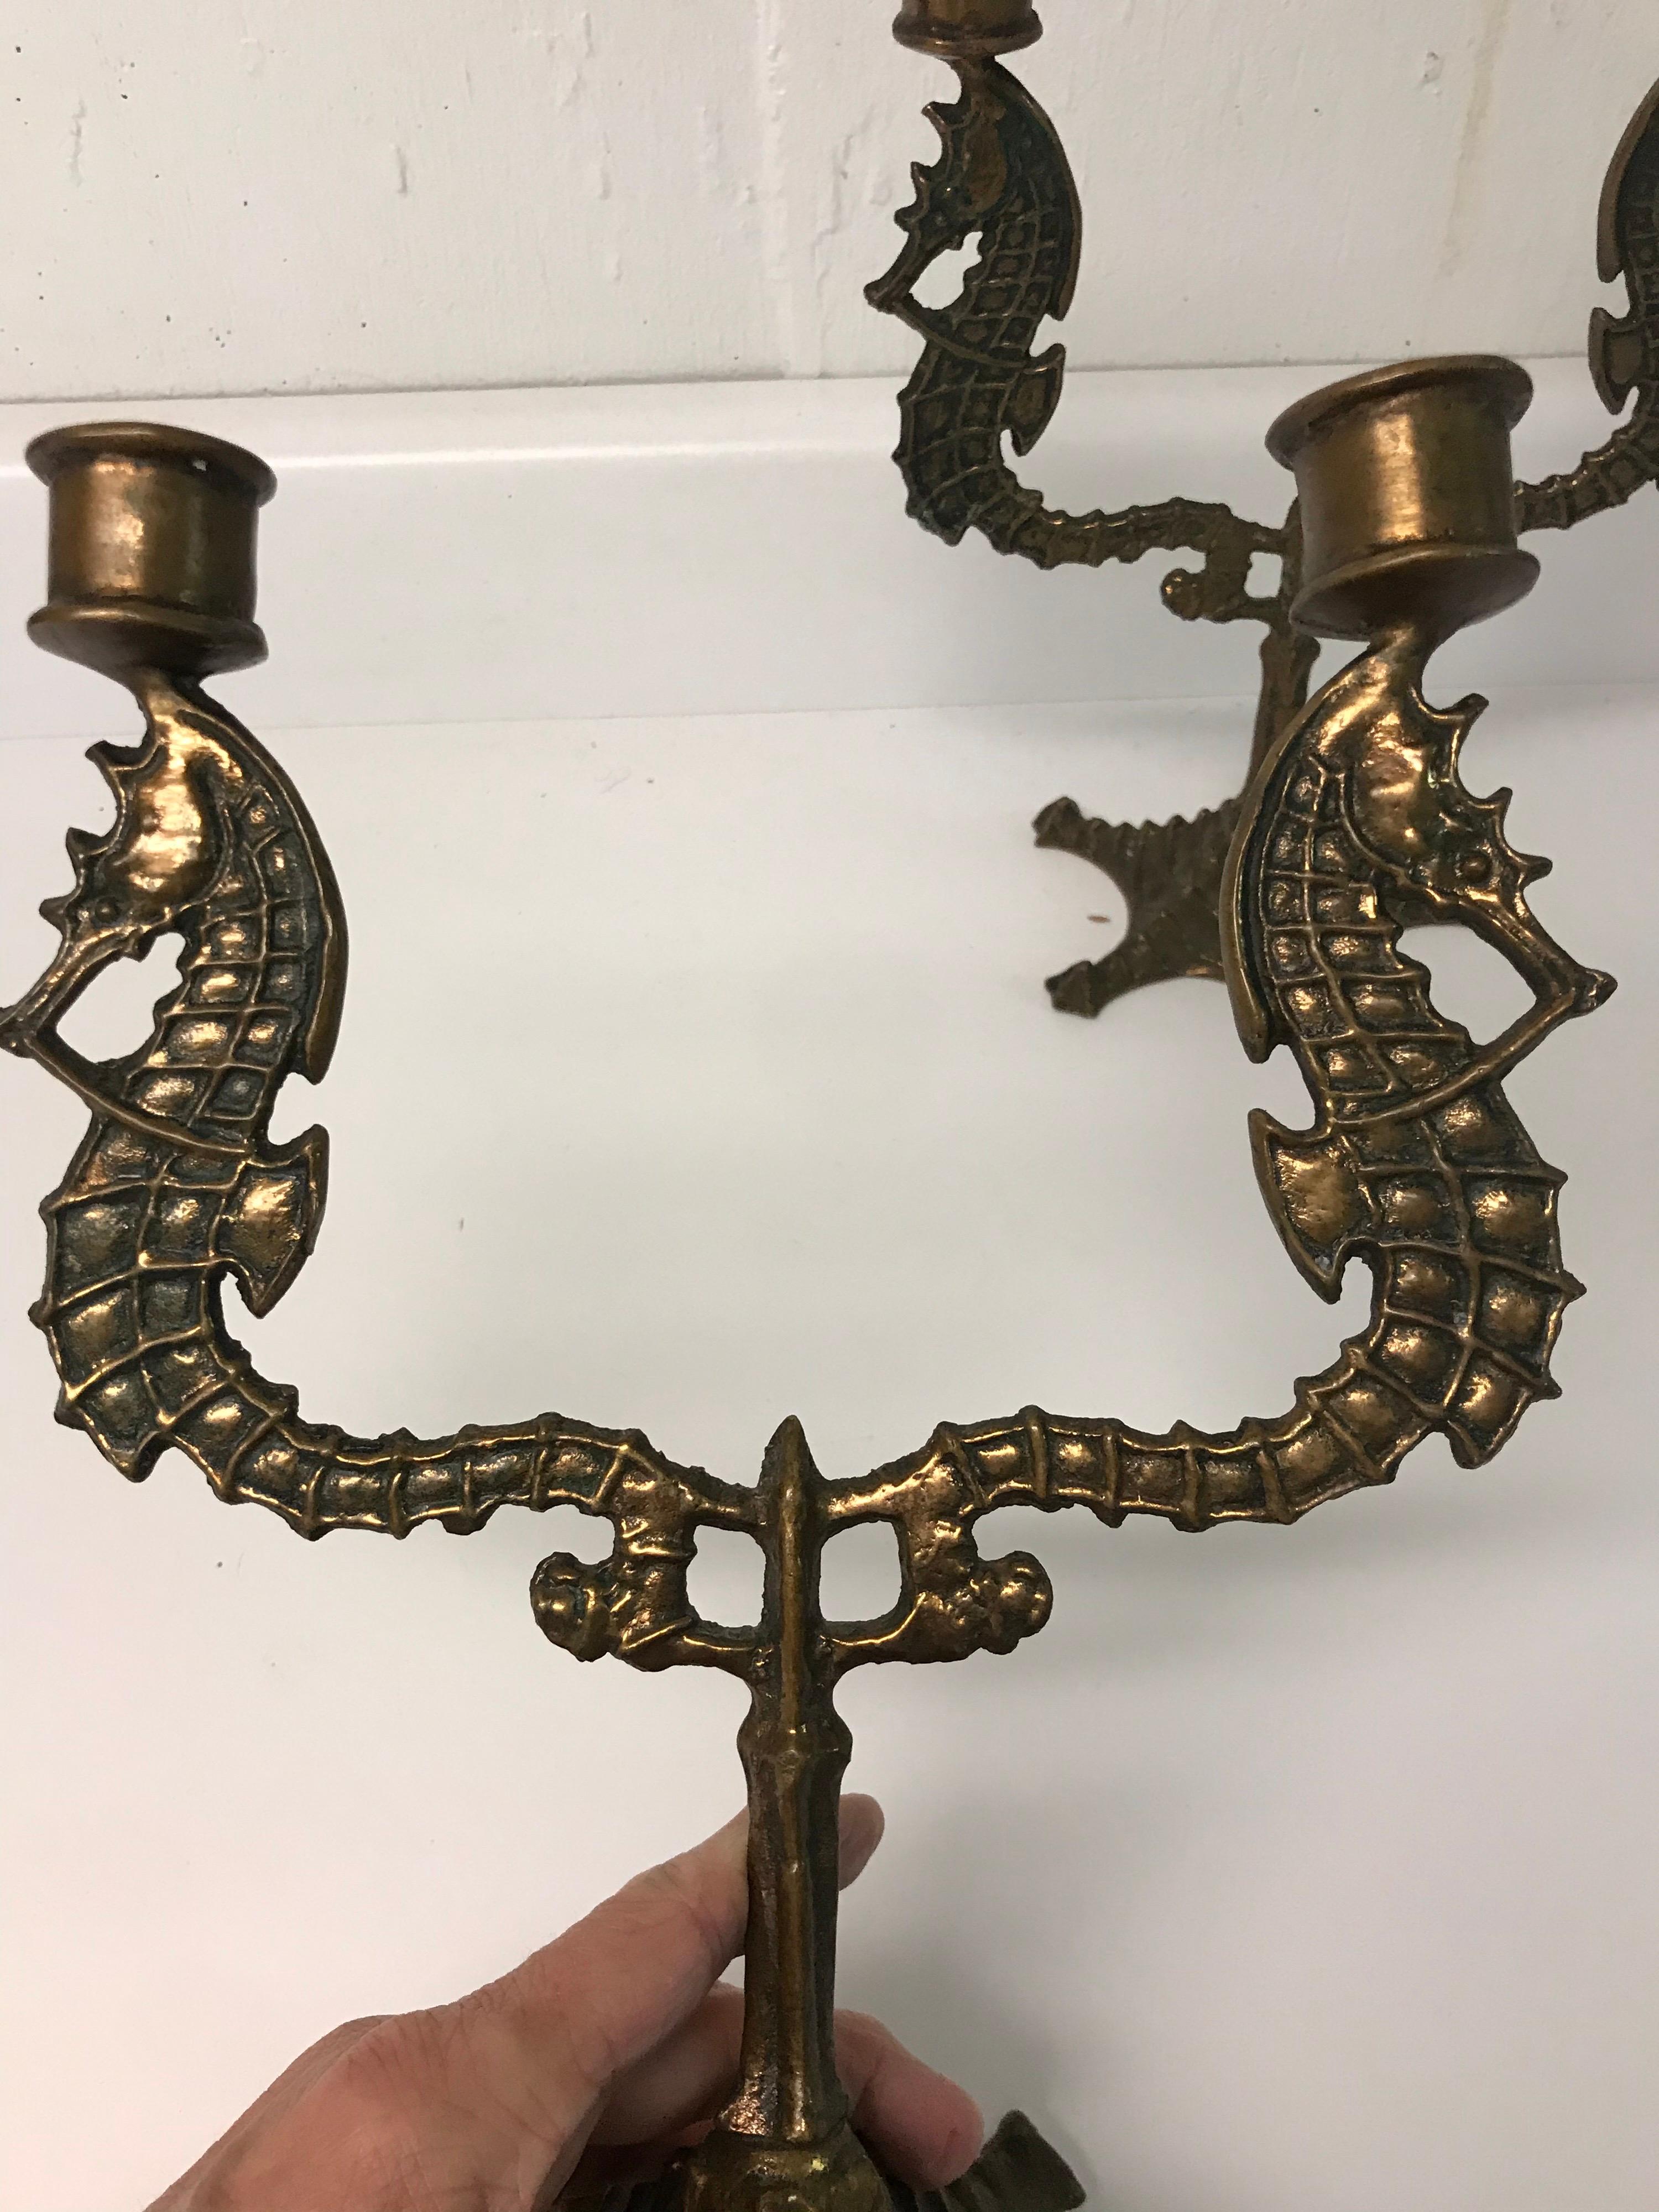 This is a pair of heavy metal bronze copper candlesticks. The sea motif of seahorse and starfish is unusual but perfect for a seaside home.
They are marked on the bottom but I was unable to make out the name of maker.